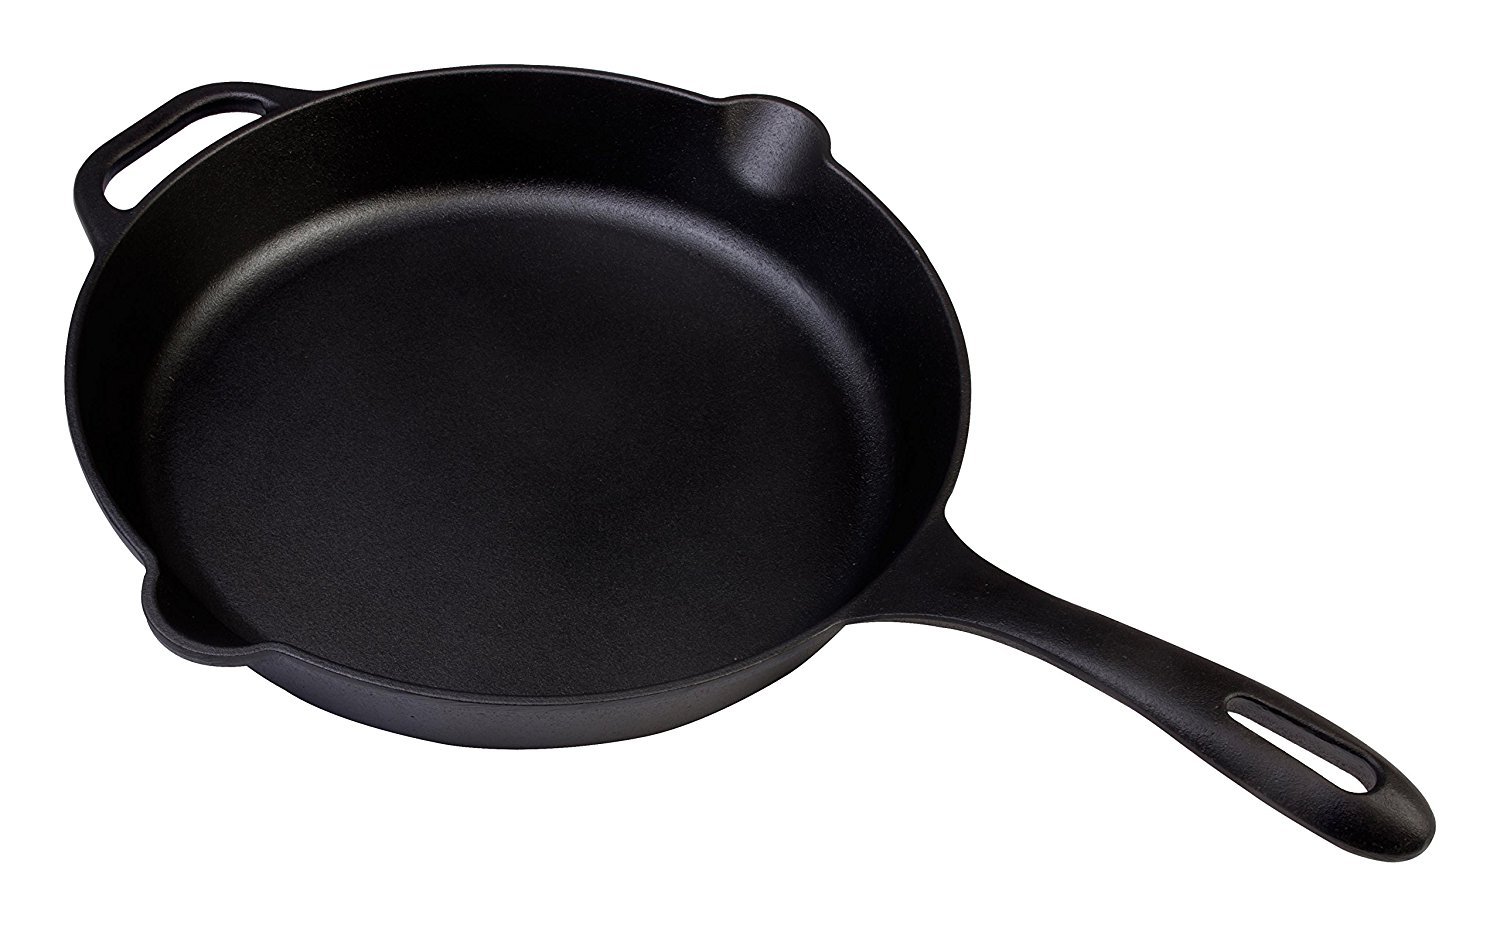 Victoria - SKL-208 Victoria Cast Iron Skillet. Small Frying Pan Seasoned  with 100% Kosher Certified Non-GMO Flaxseed Oil, 8, Black